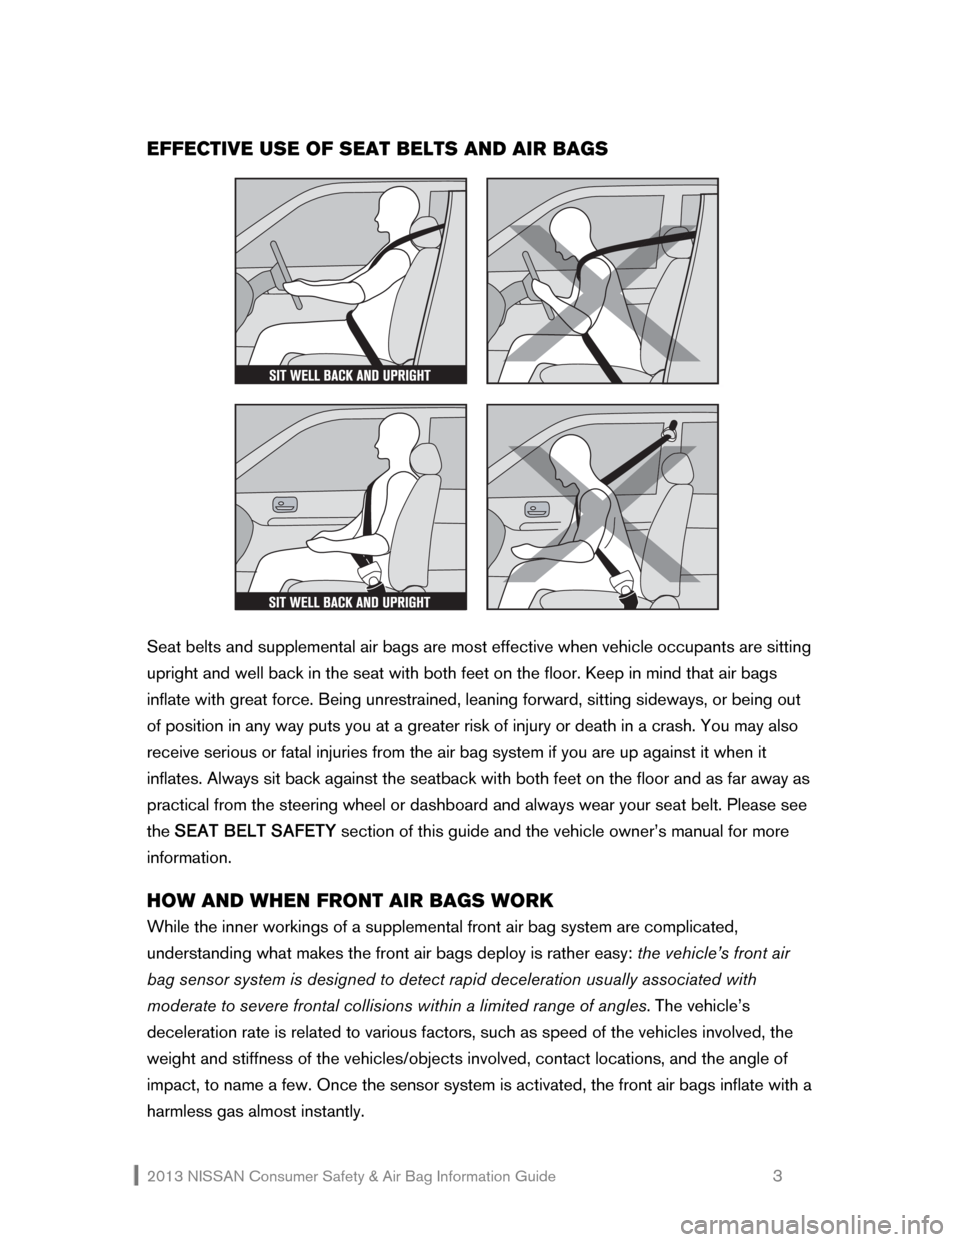 NISSAN MURANO 2013 2.G Consumer Safety Air Bag Information Guide 2013 NISSAN Consumer Safety & Air Bag Information Guide                                                   3 
EFFECTIVE USE OF SEAT BELTS AND AIR BAGS 
 
 
 
Seat belts and supplemental air bags are mo